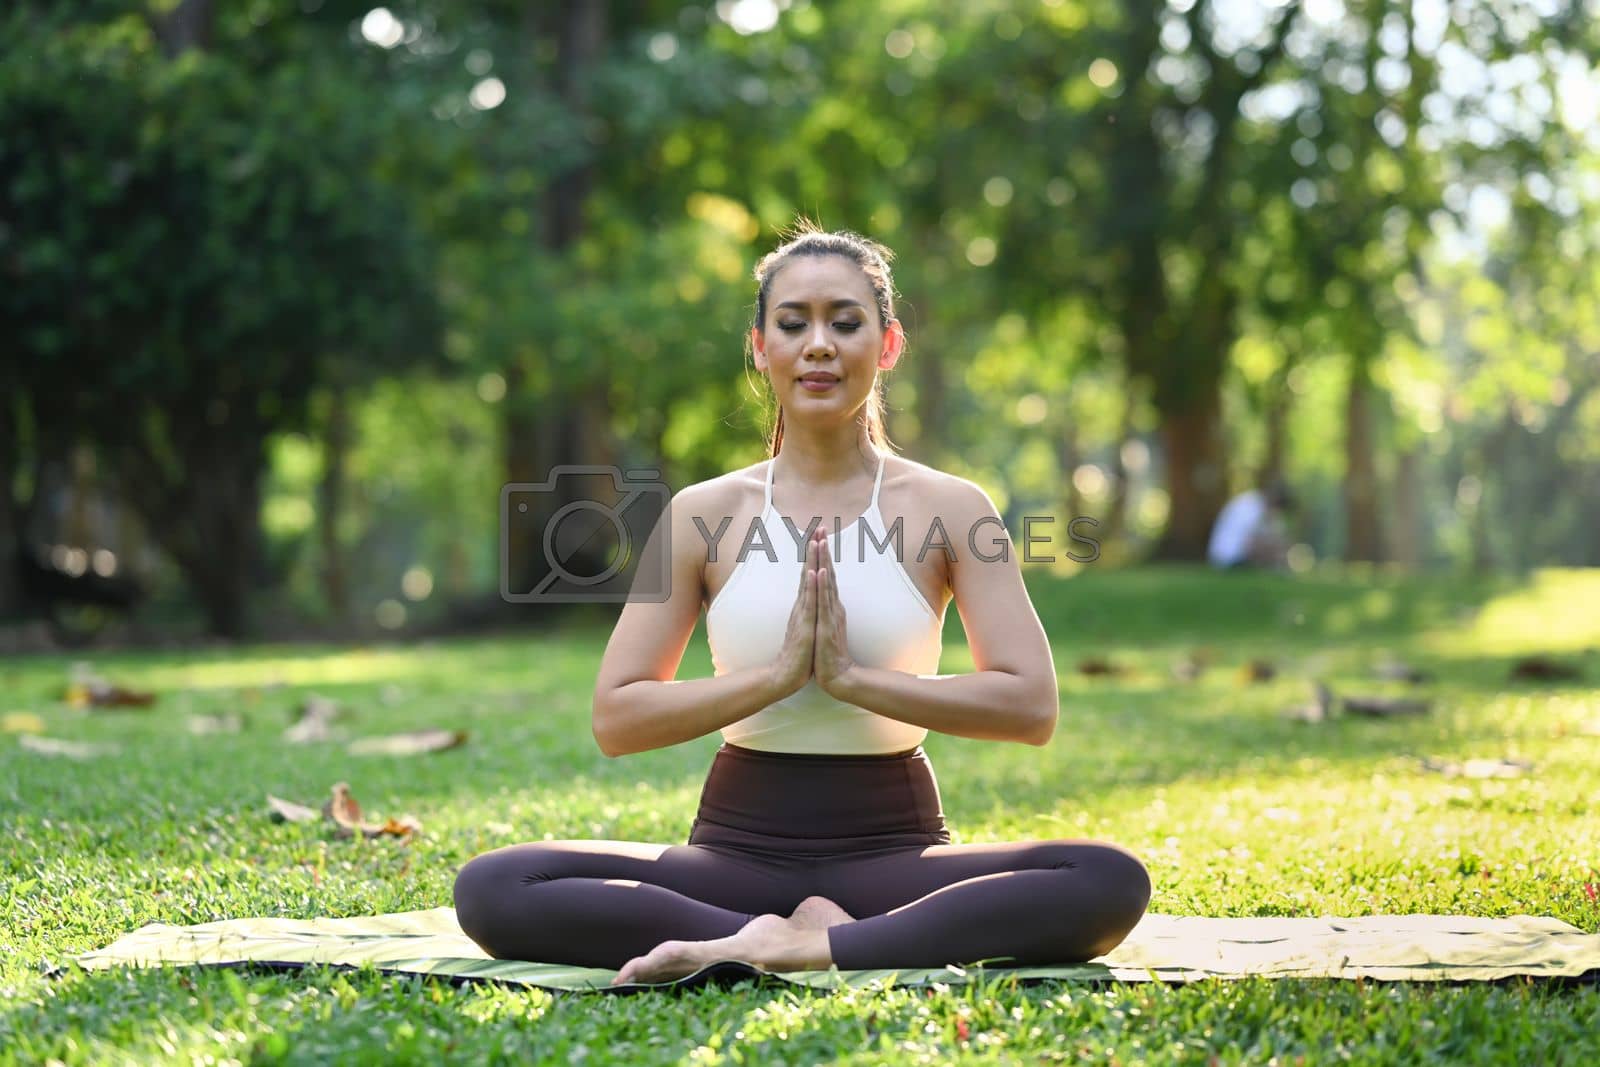 Royalty free image of Healthy beautiful woman practicing yoga, meditating with closed eyes. Health lifestyle and Mindfulness meditation concept by prathanchorruangsak